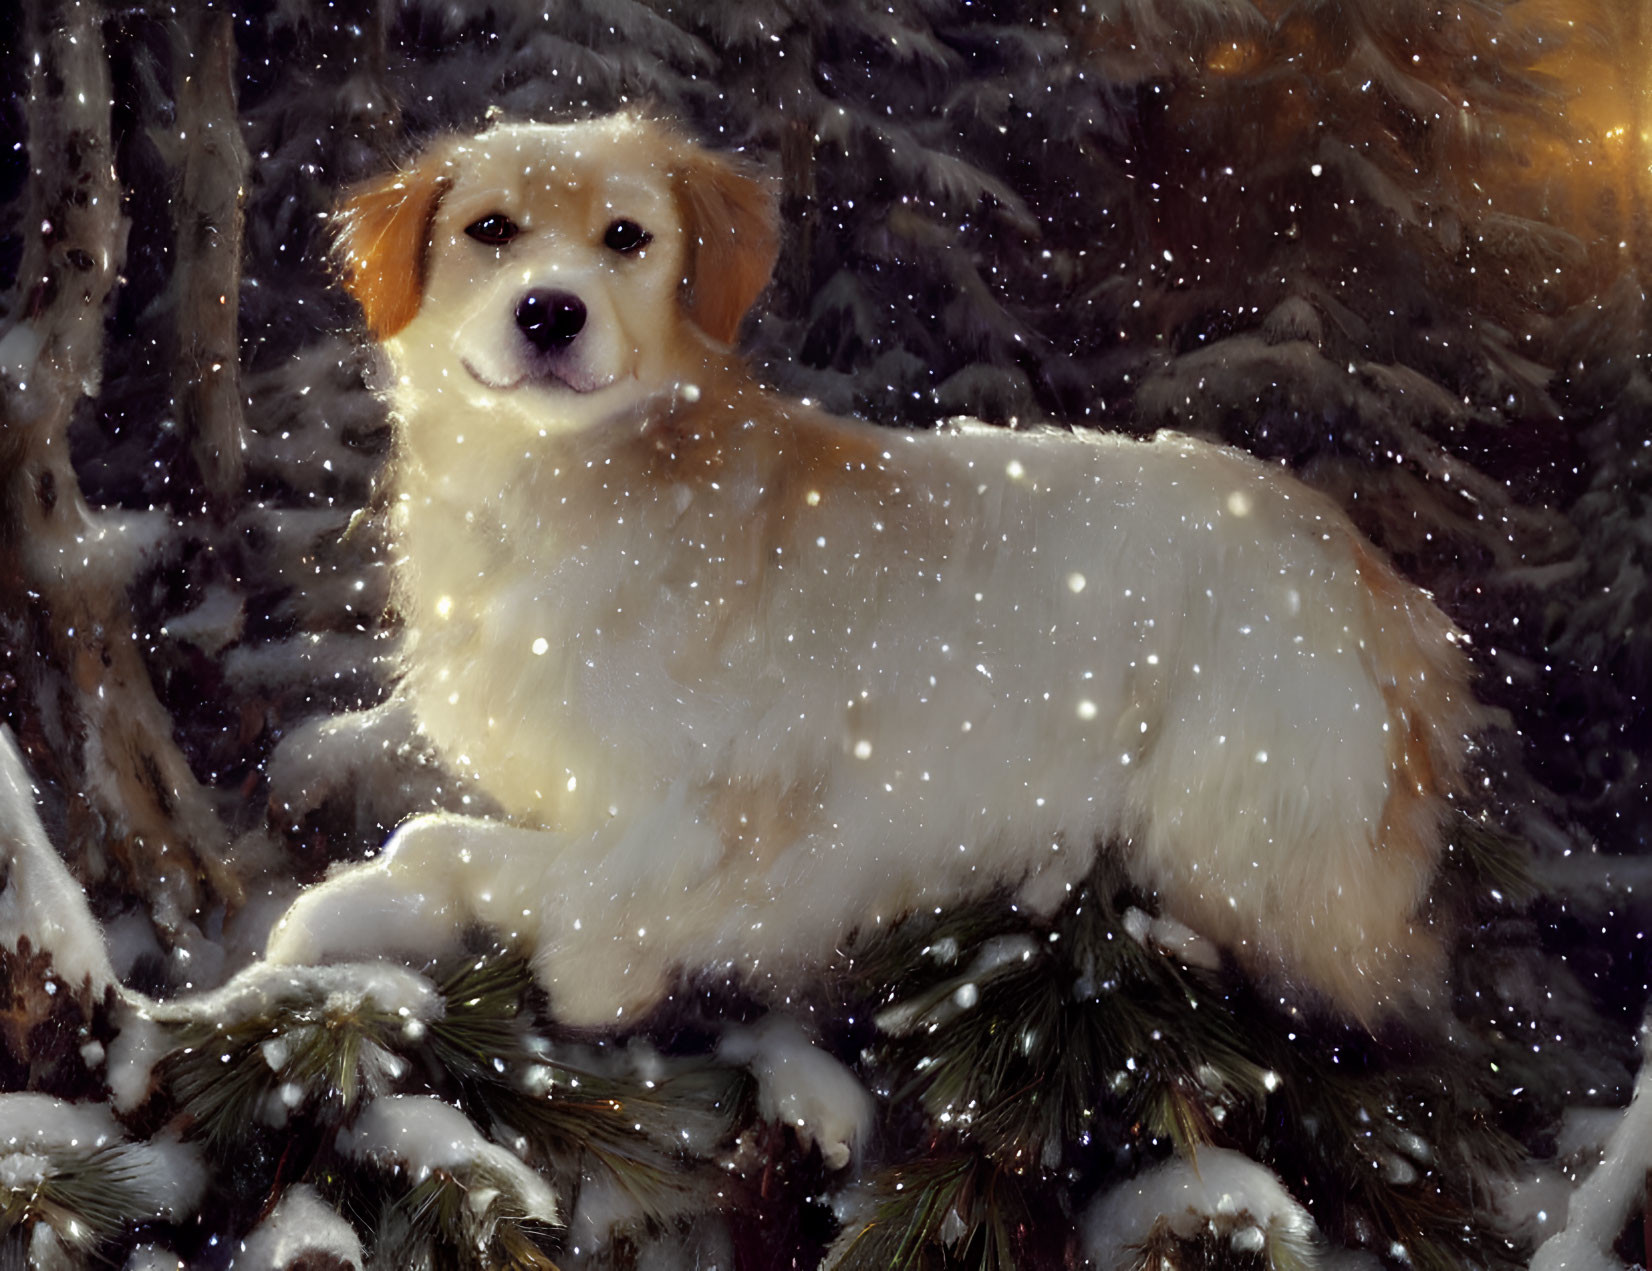 Golden retriever on snow-covered branch in wintry landscape